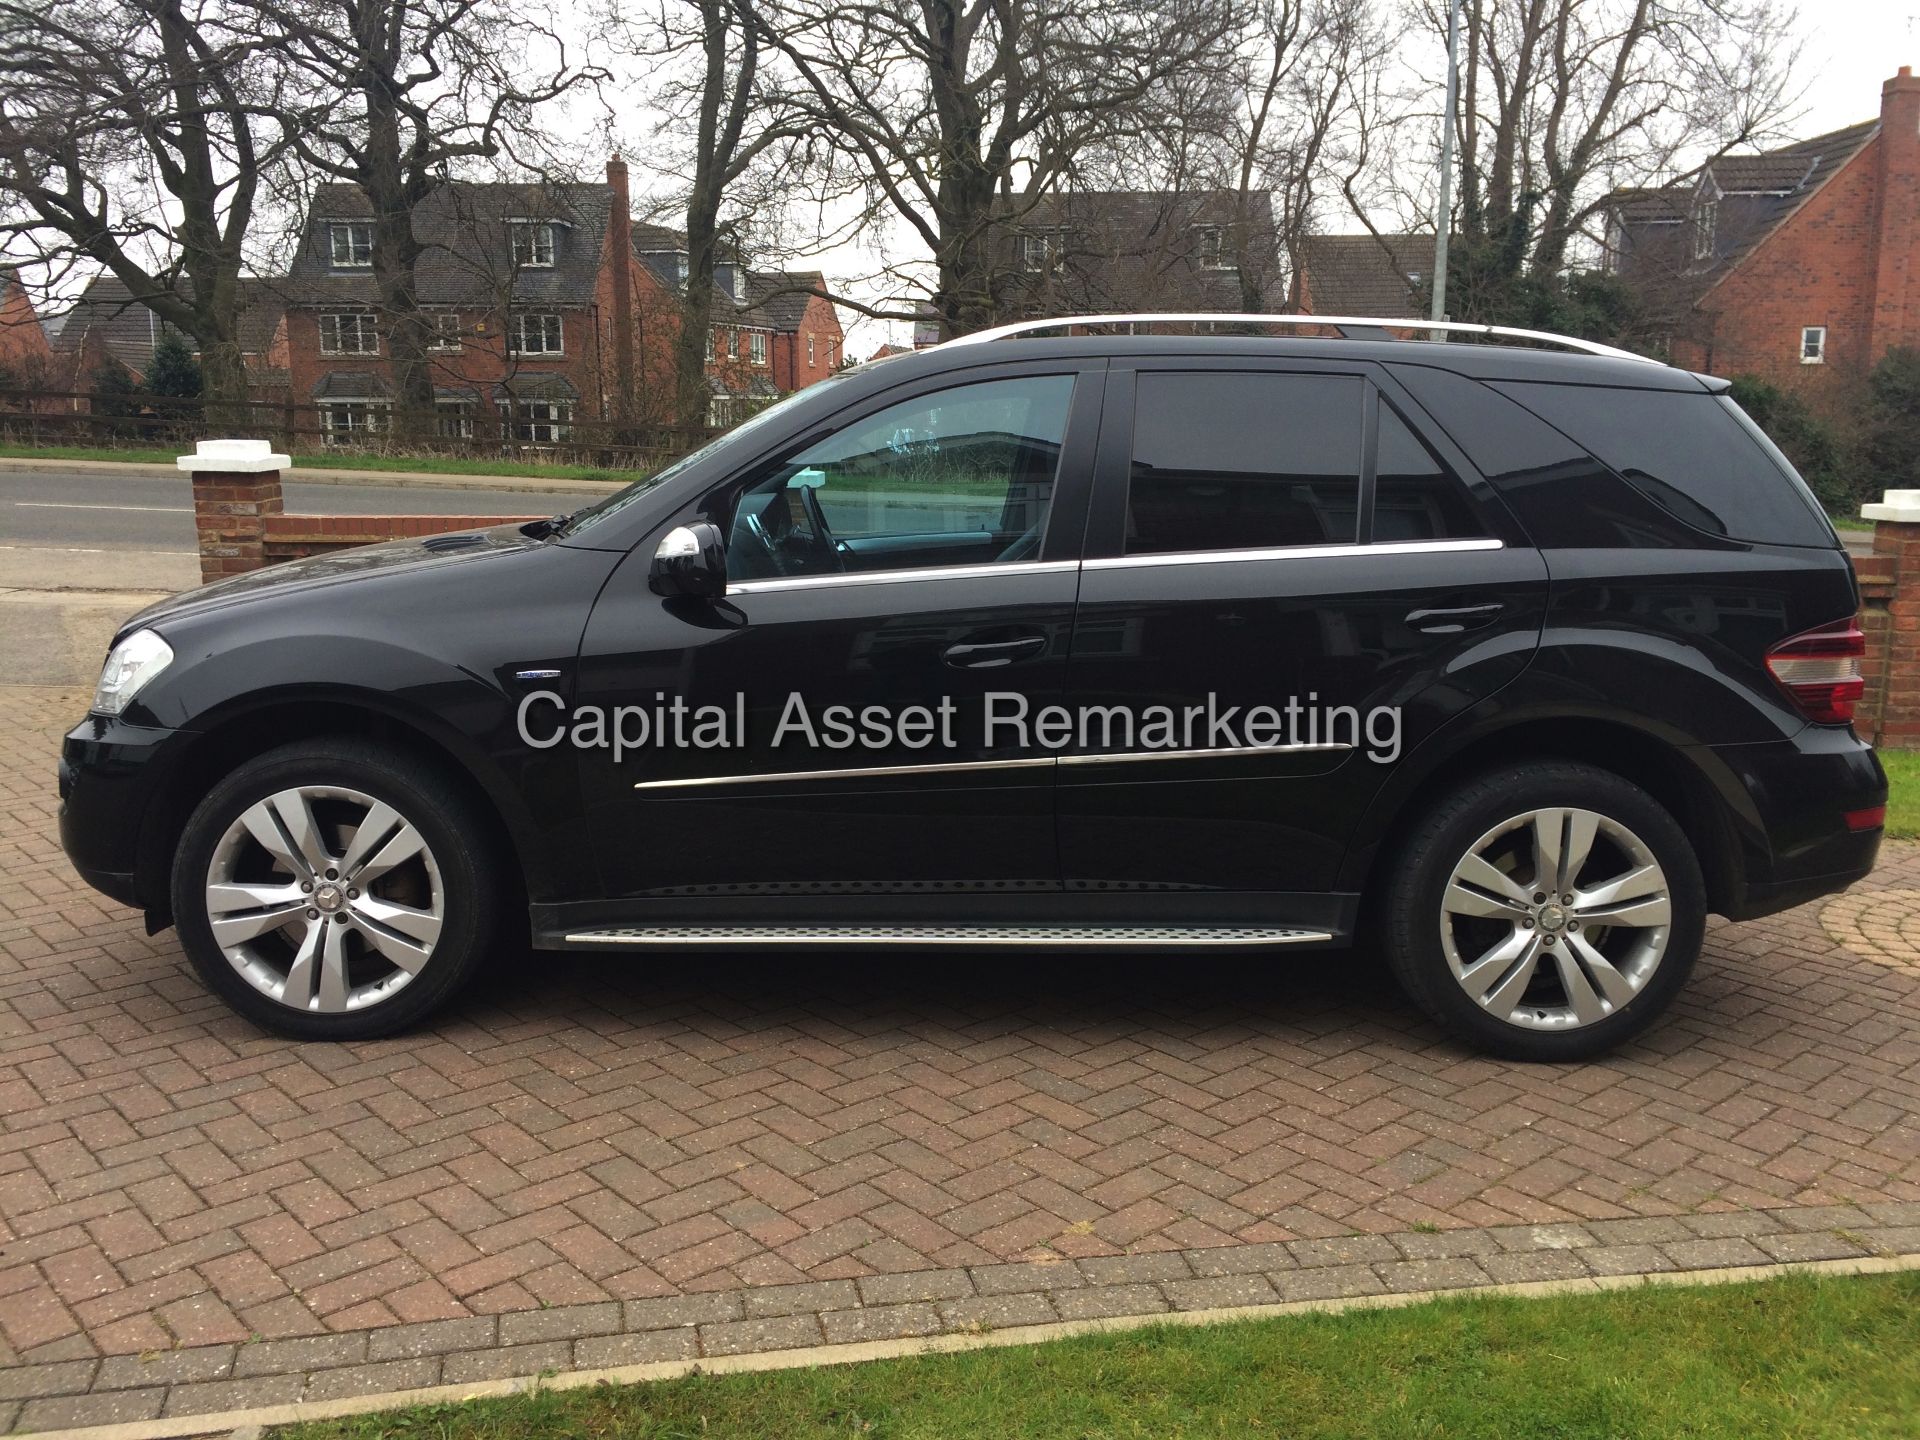 MERCEDES ML 350CDI "SPORT - BLACK EDITION" AUTO / TIP-TRONIC - FULLY LOADED - SAT NAV - STUNNING !!! - Image 4 of 25